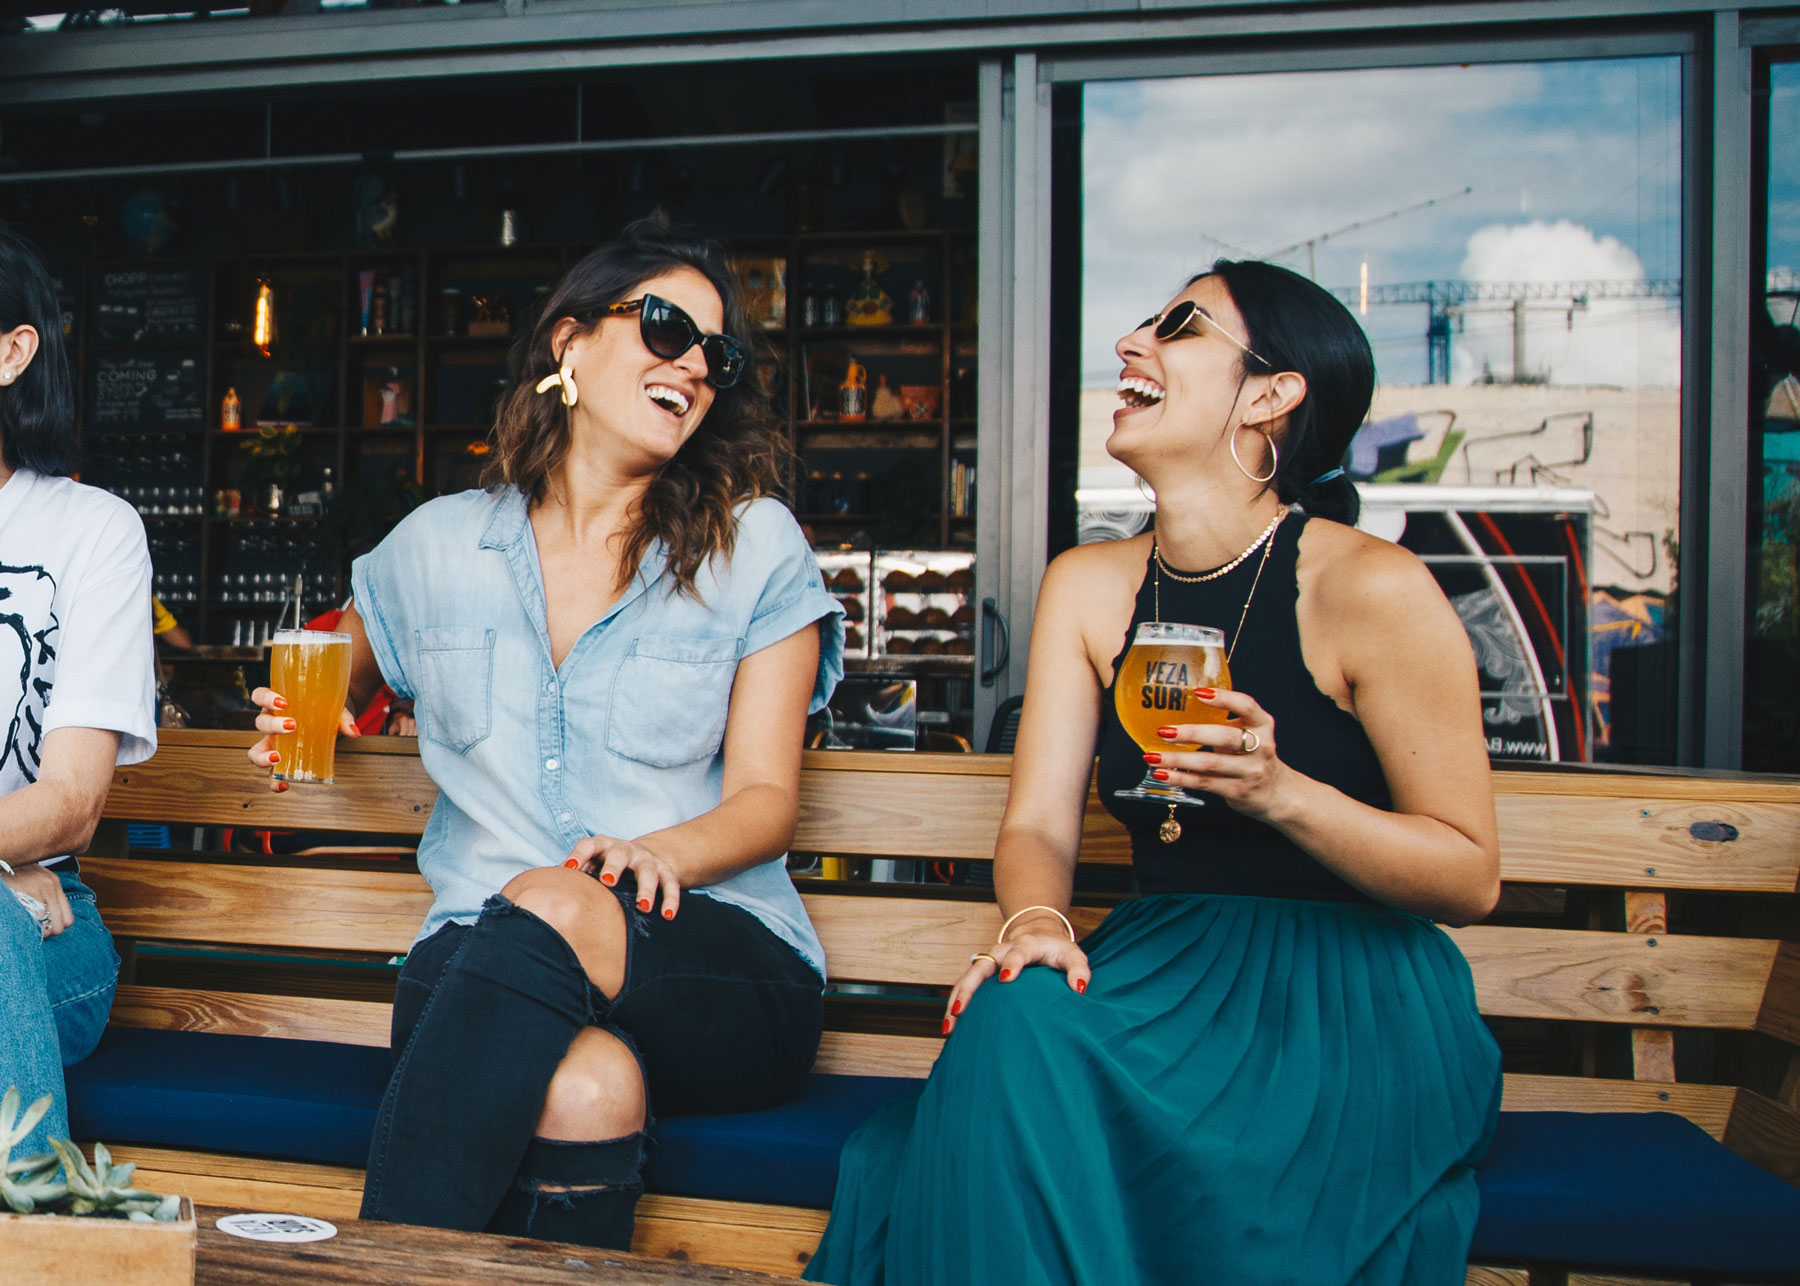 Women friends laughing, drinking craft beer and relaxing at outdoor pub